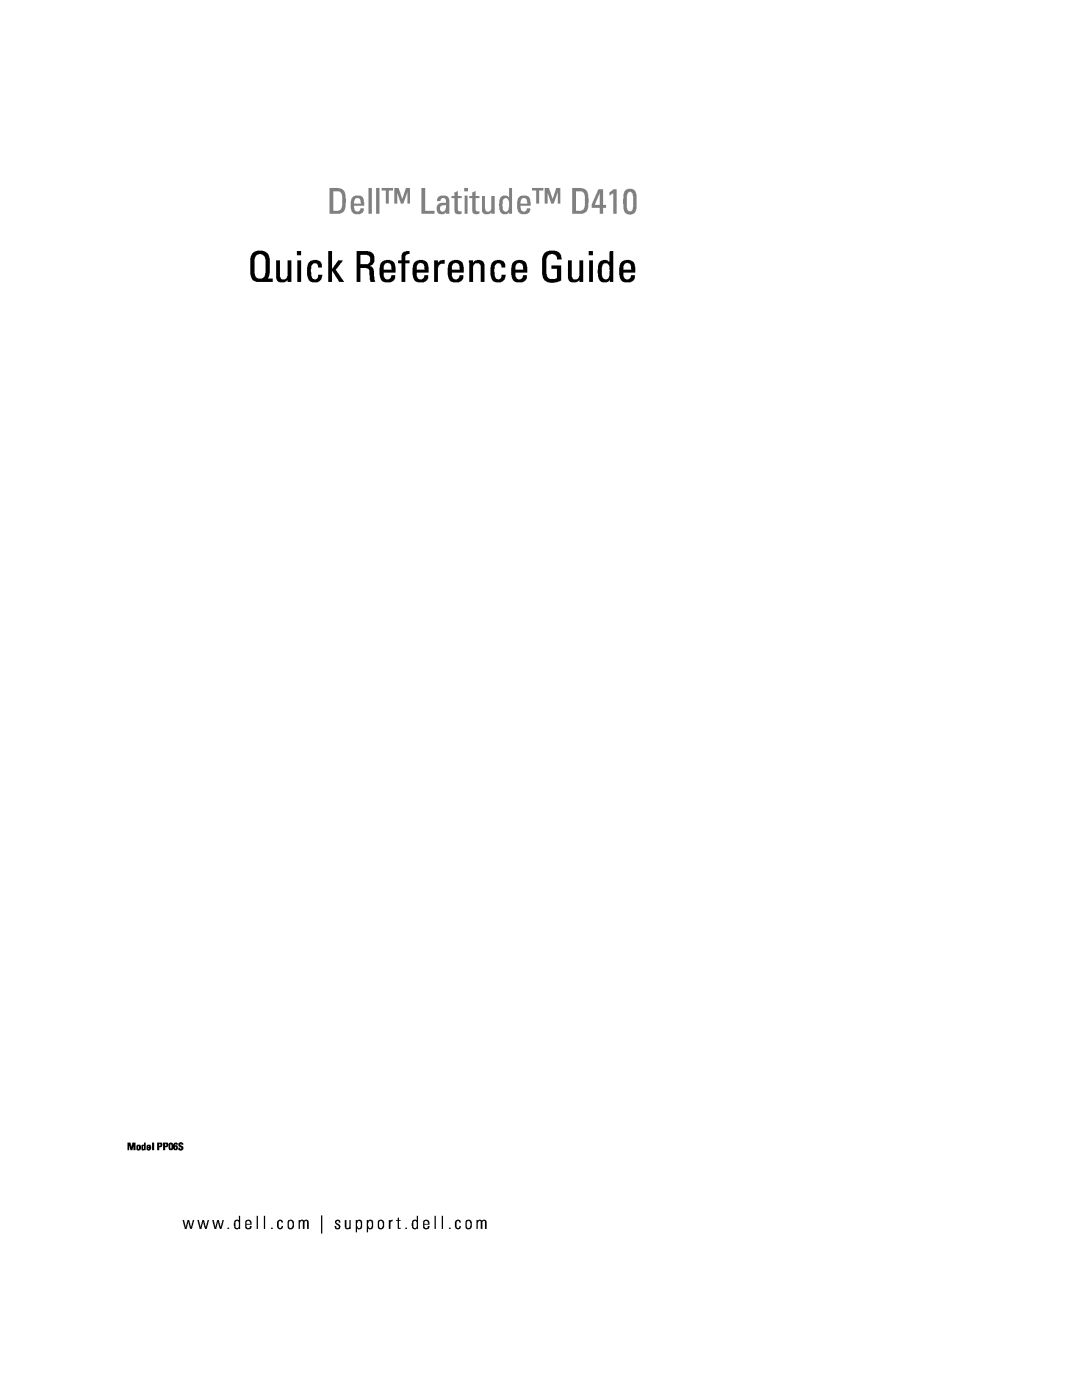 Dell manual Quick Reference Guide, Dell Latitude D410, Model PP06S 